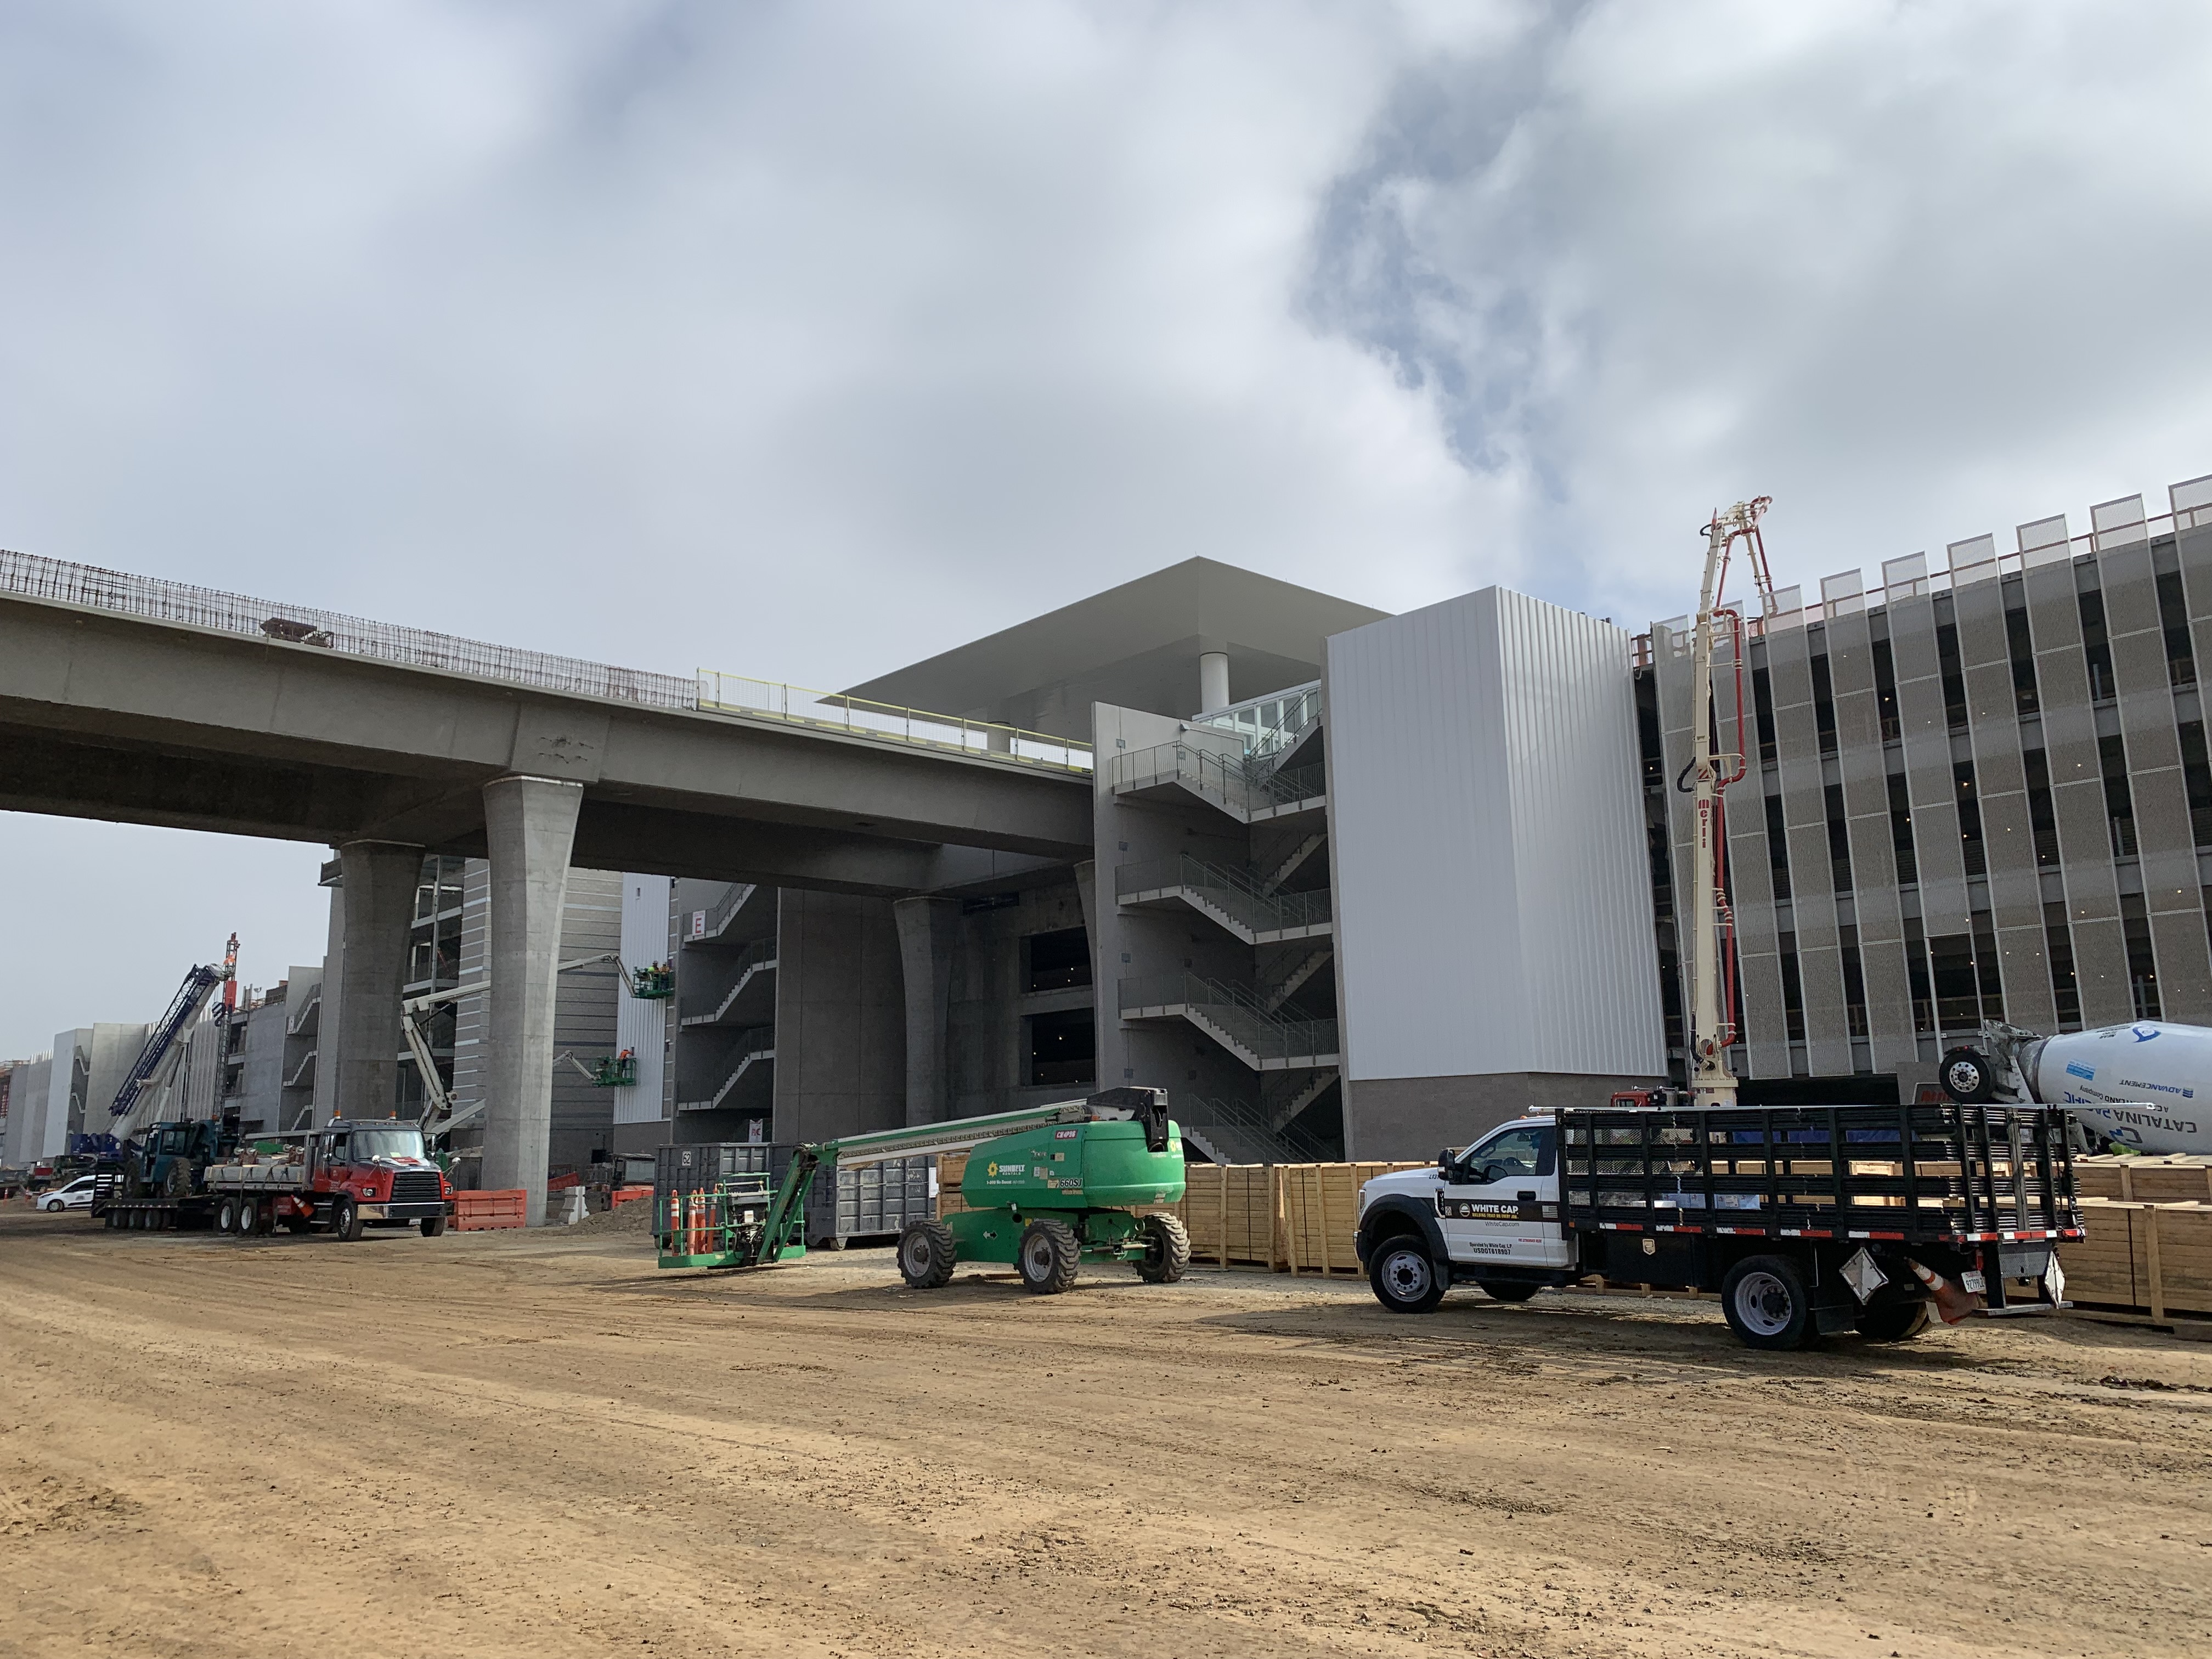 Automated People Mover guideway at the Consolidated Rent-A-Car facility Ready Return building.